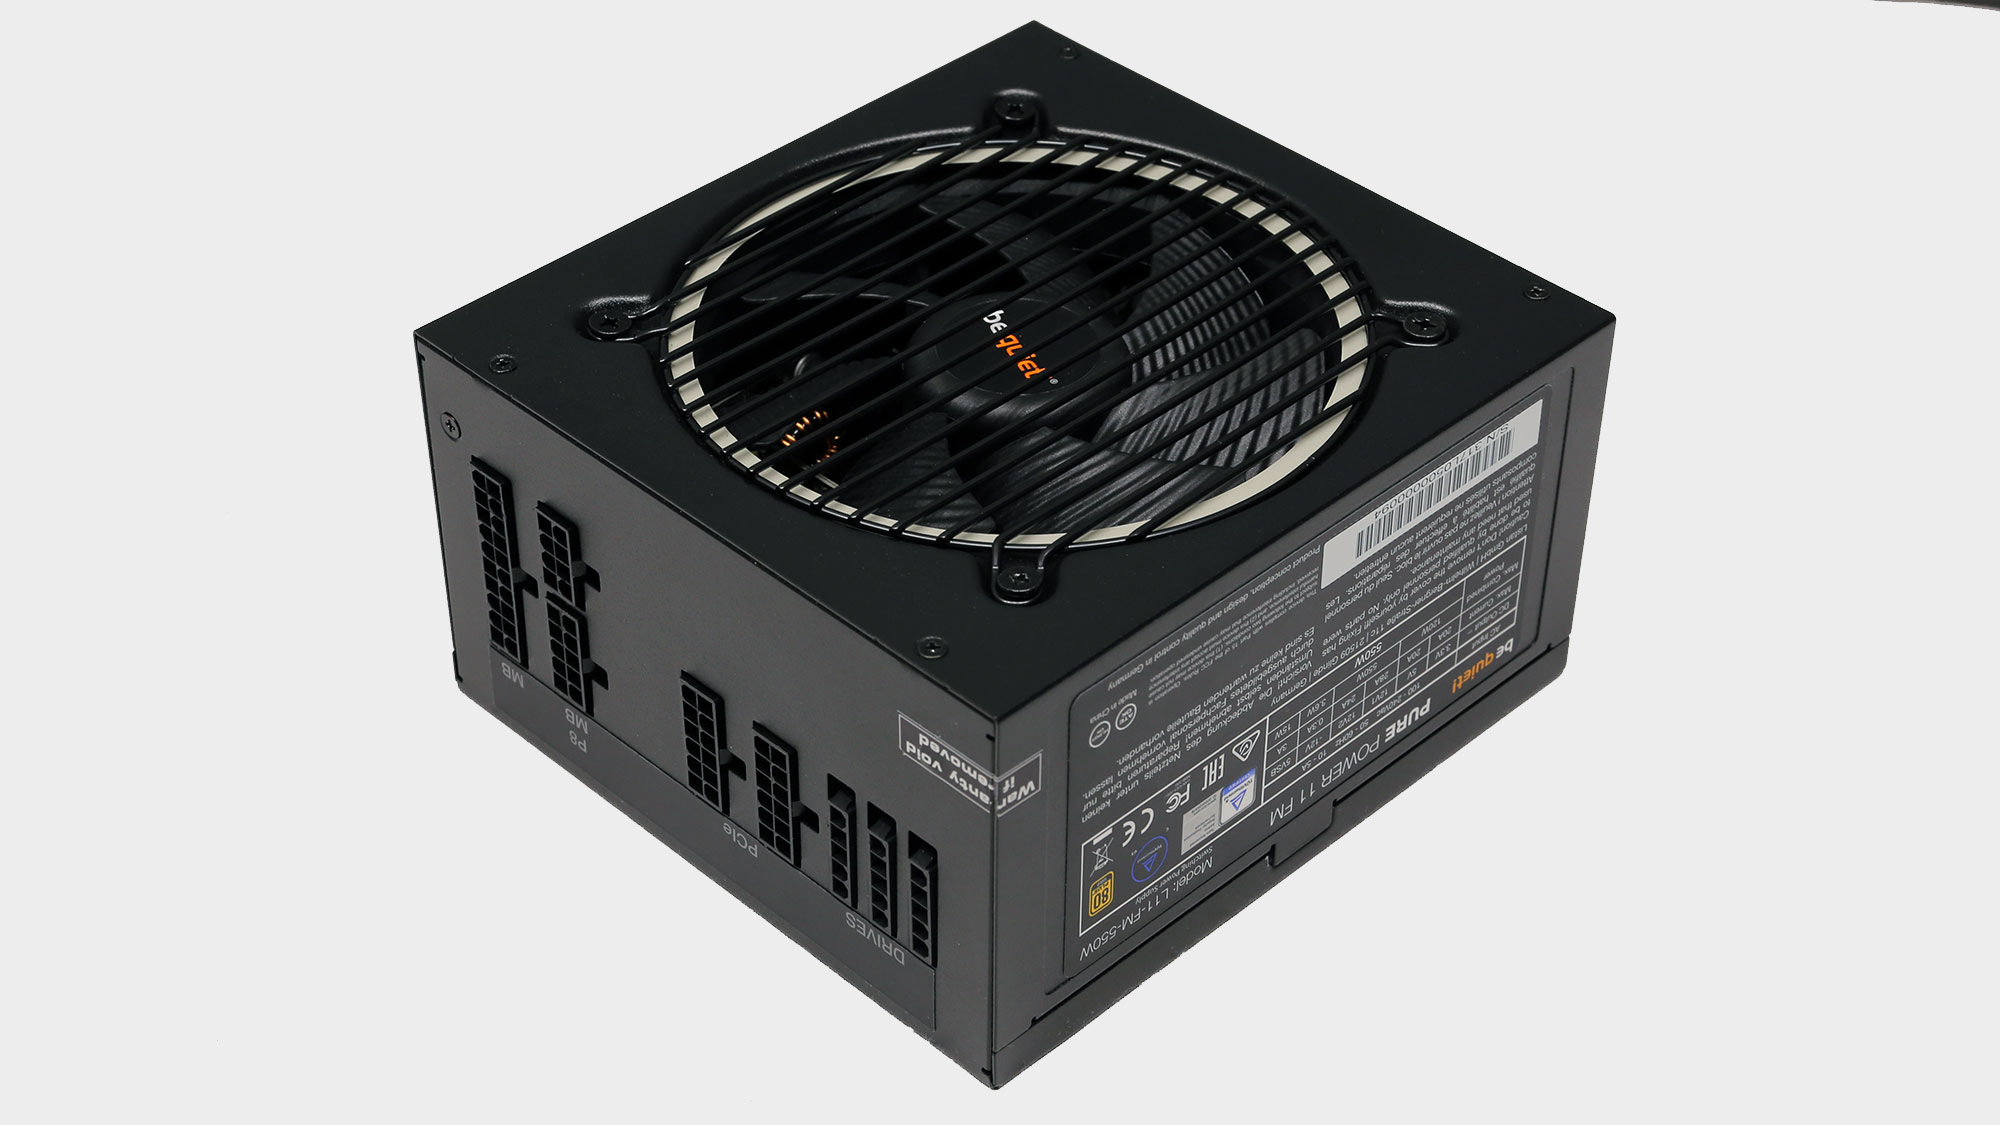 Be quiet! Pure Power 11 FM 550W power supply review